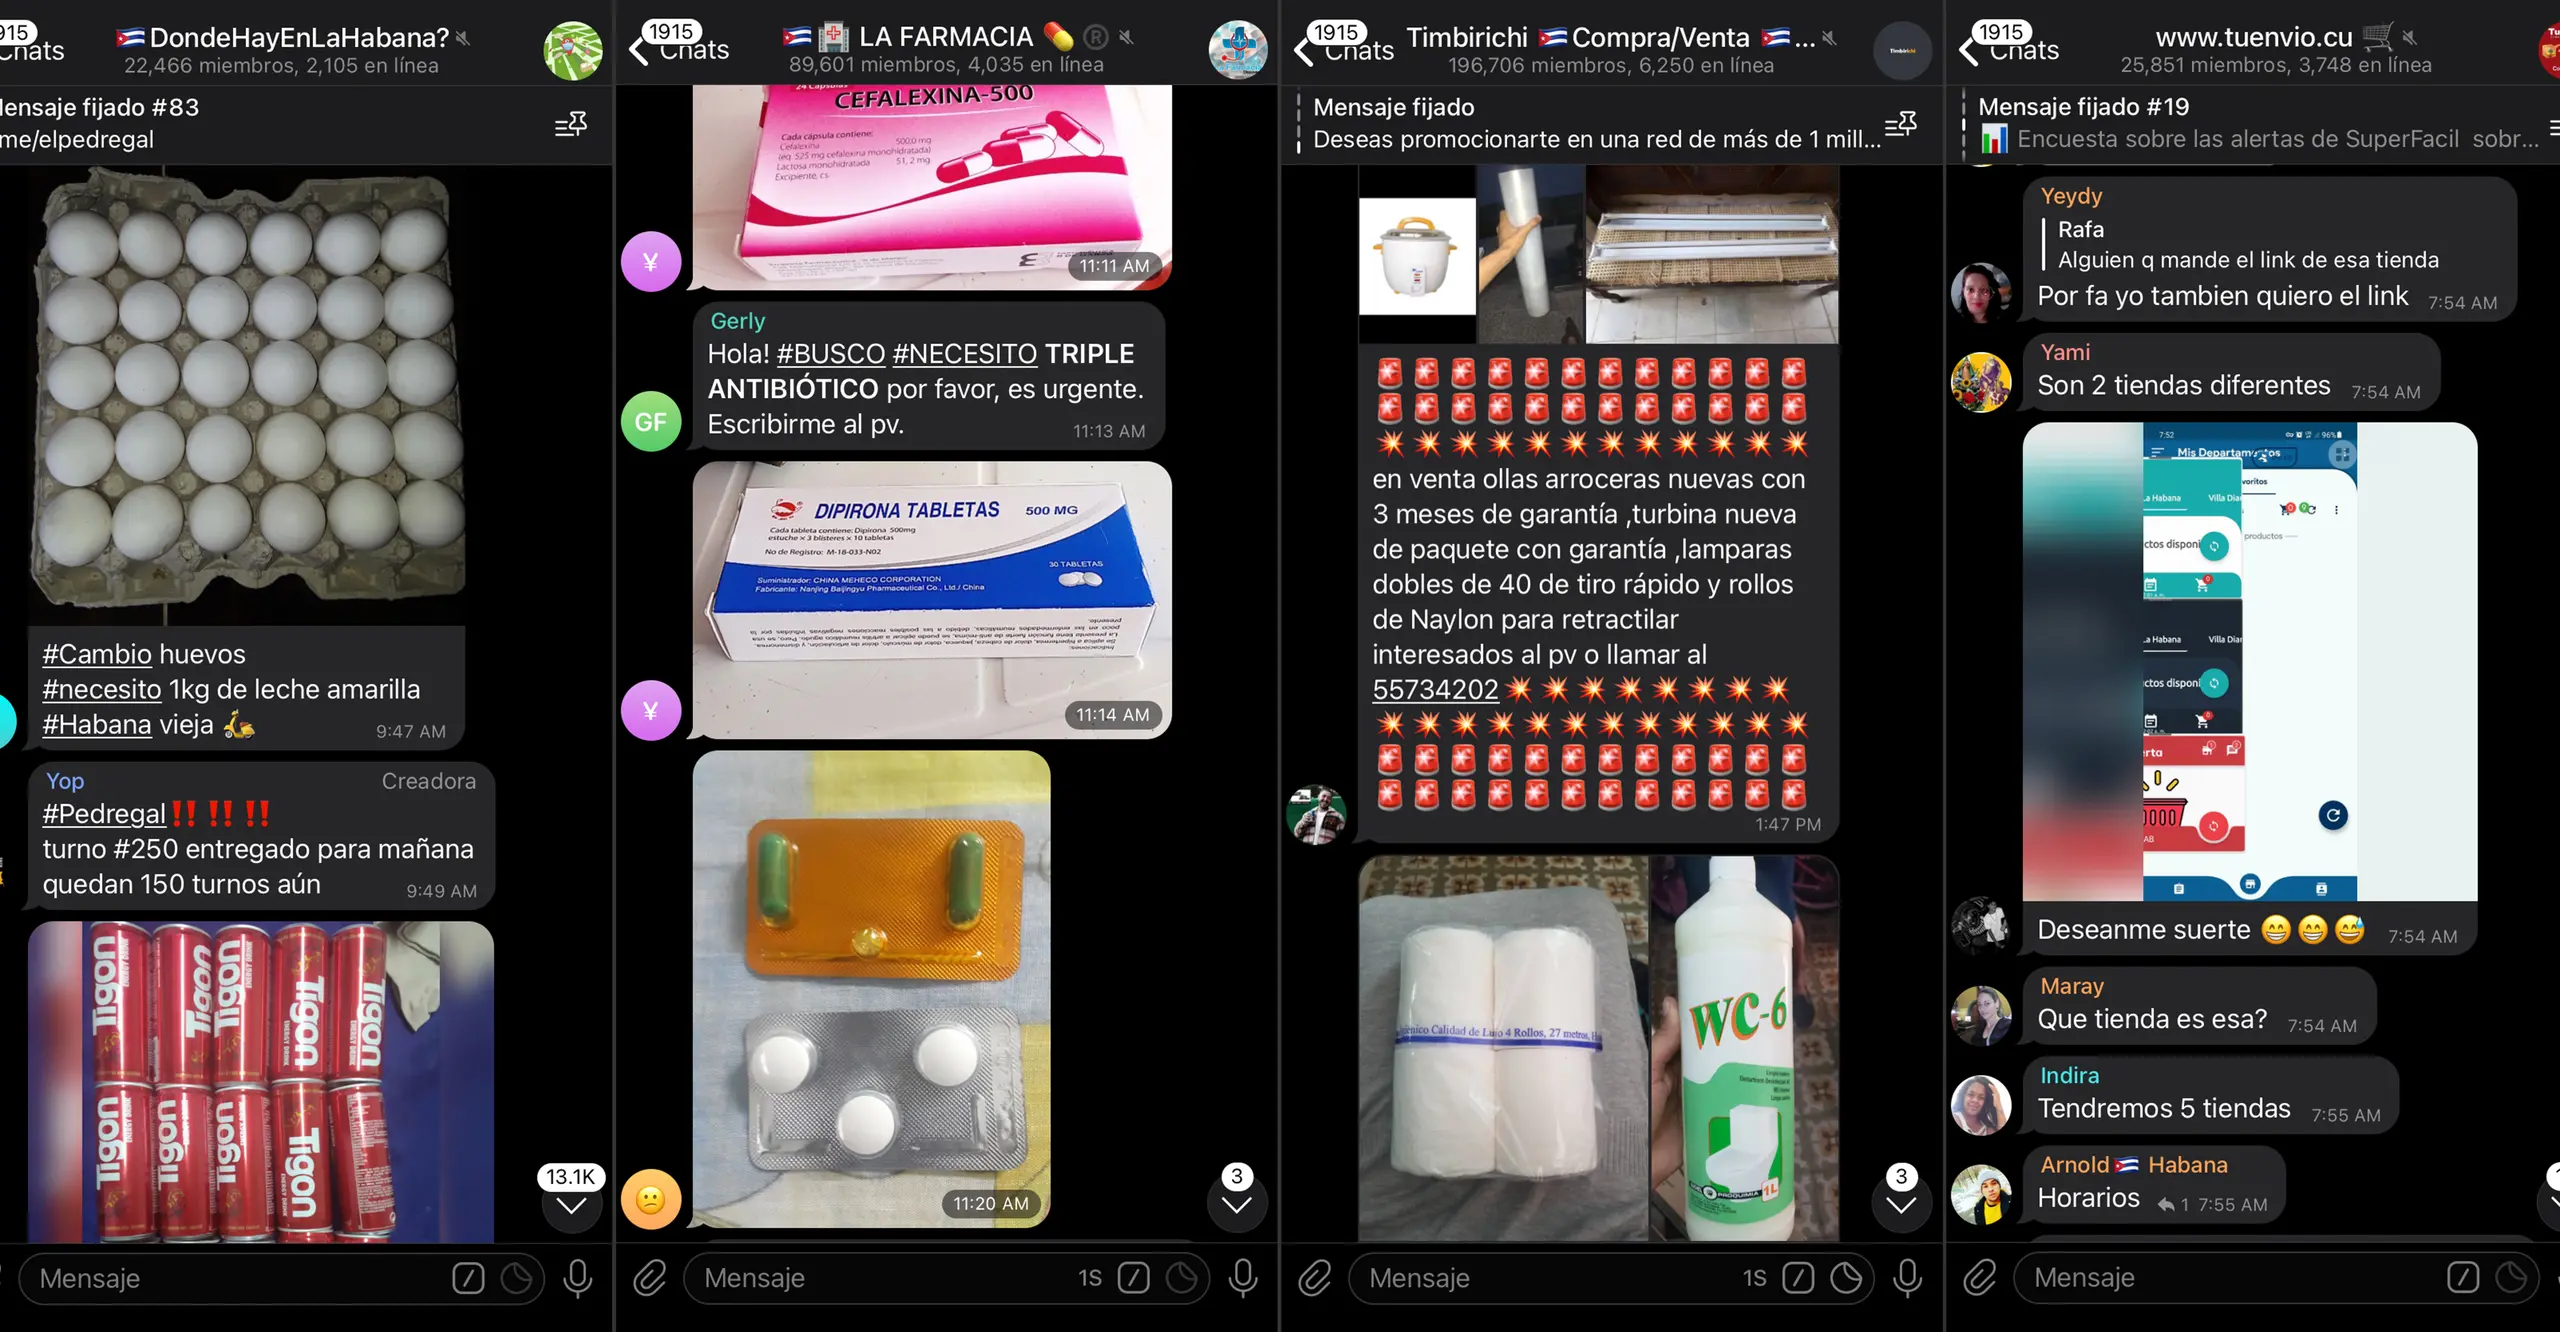 Screenshots of four telegram channels, showing products including eggs, medication, and soft drinks